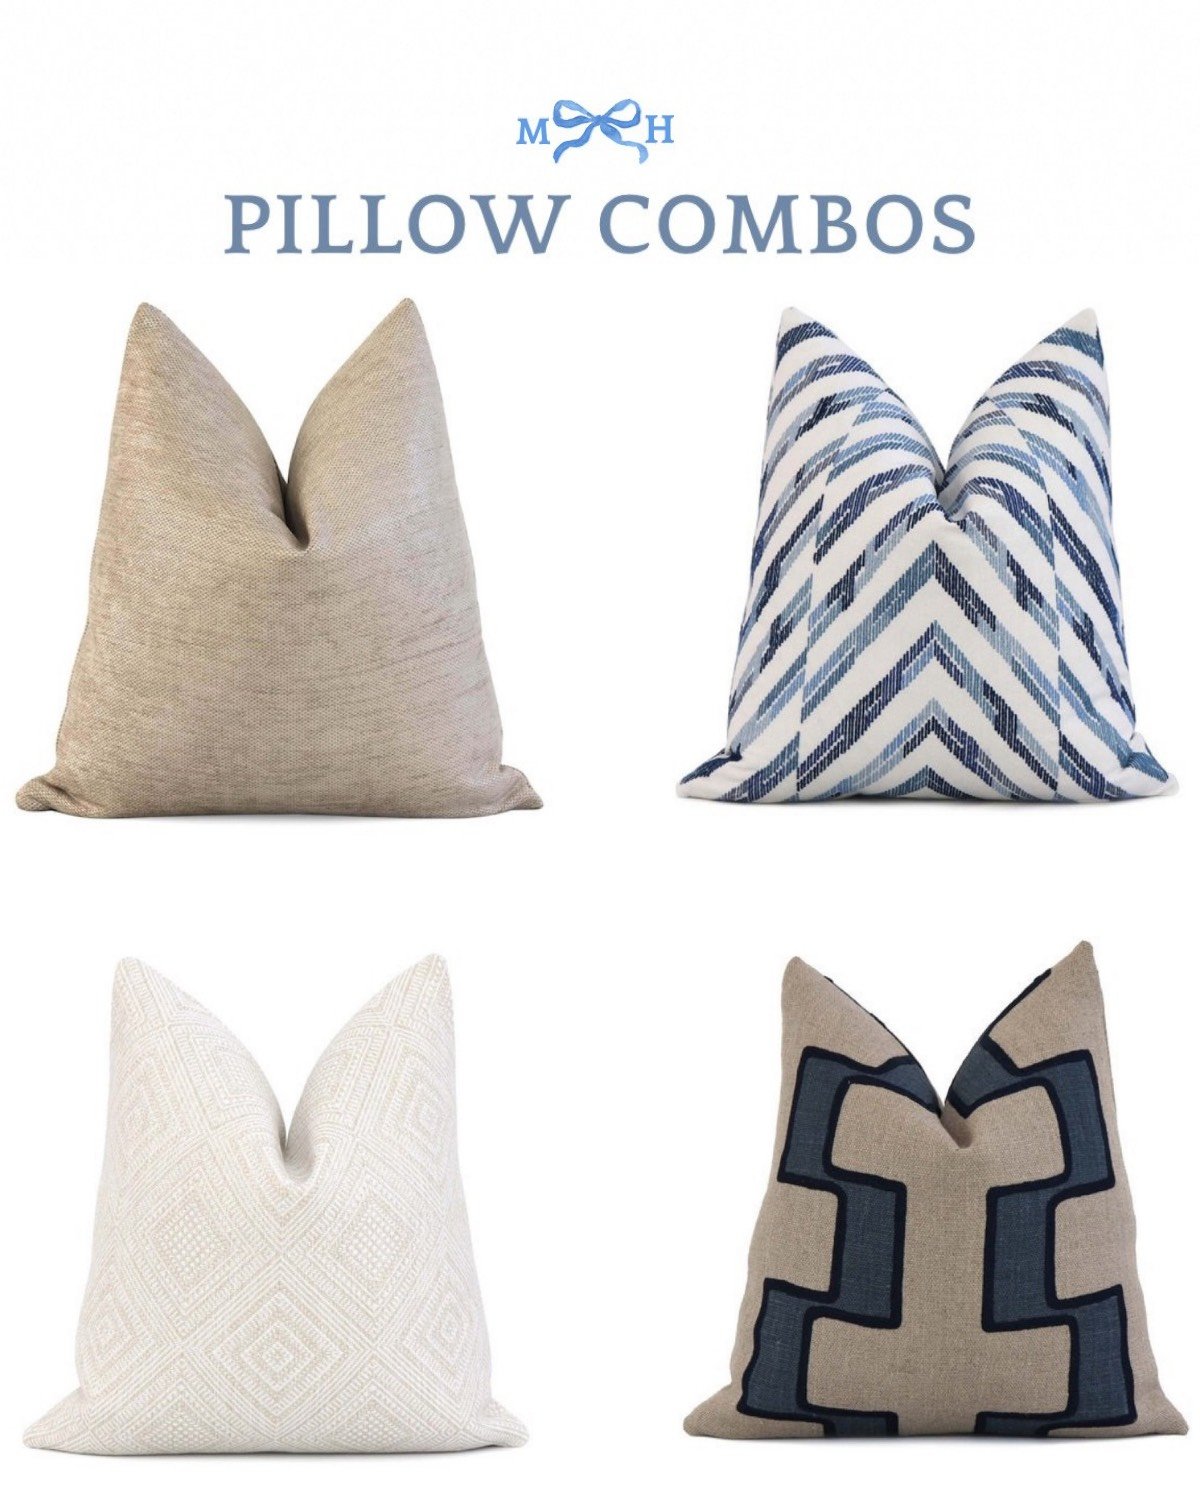 How to Choose Throw Pillow Combinations (6 Tips)